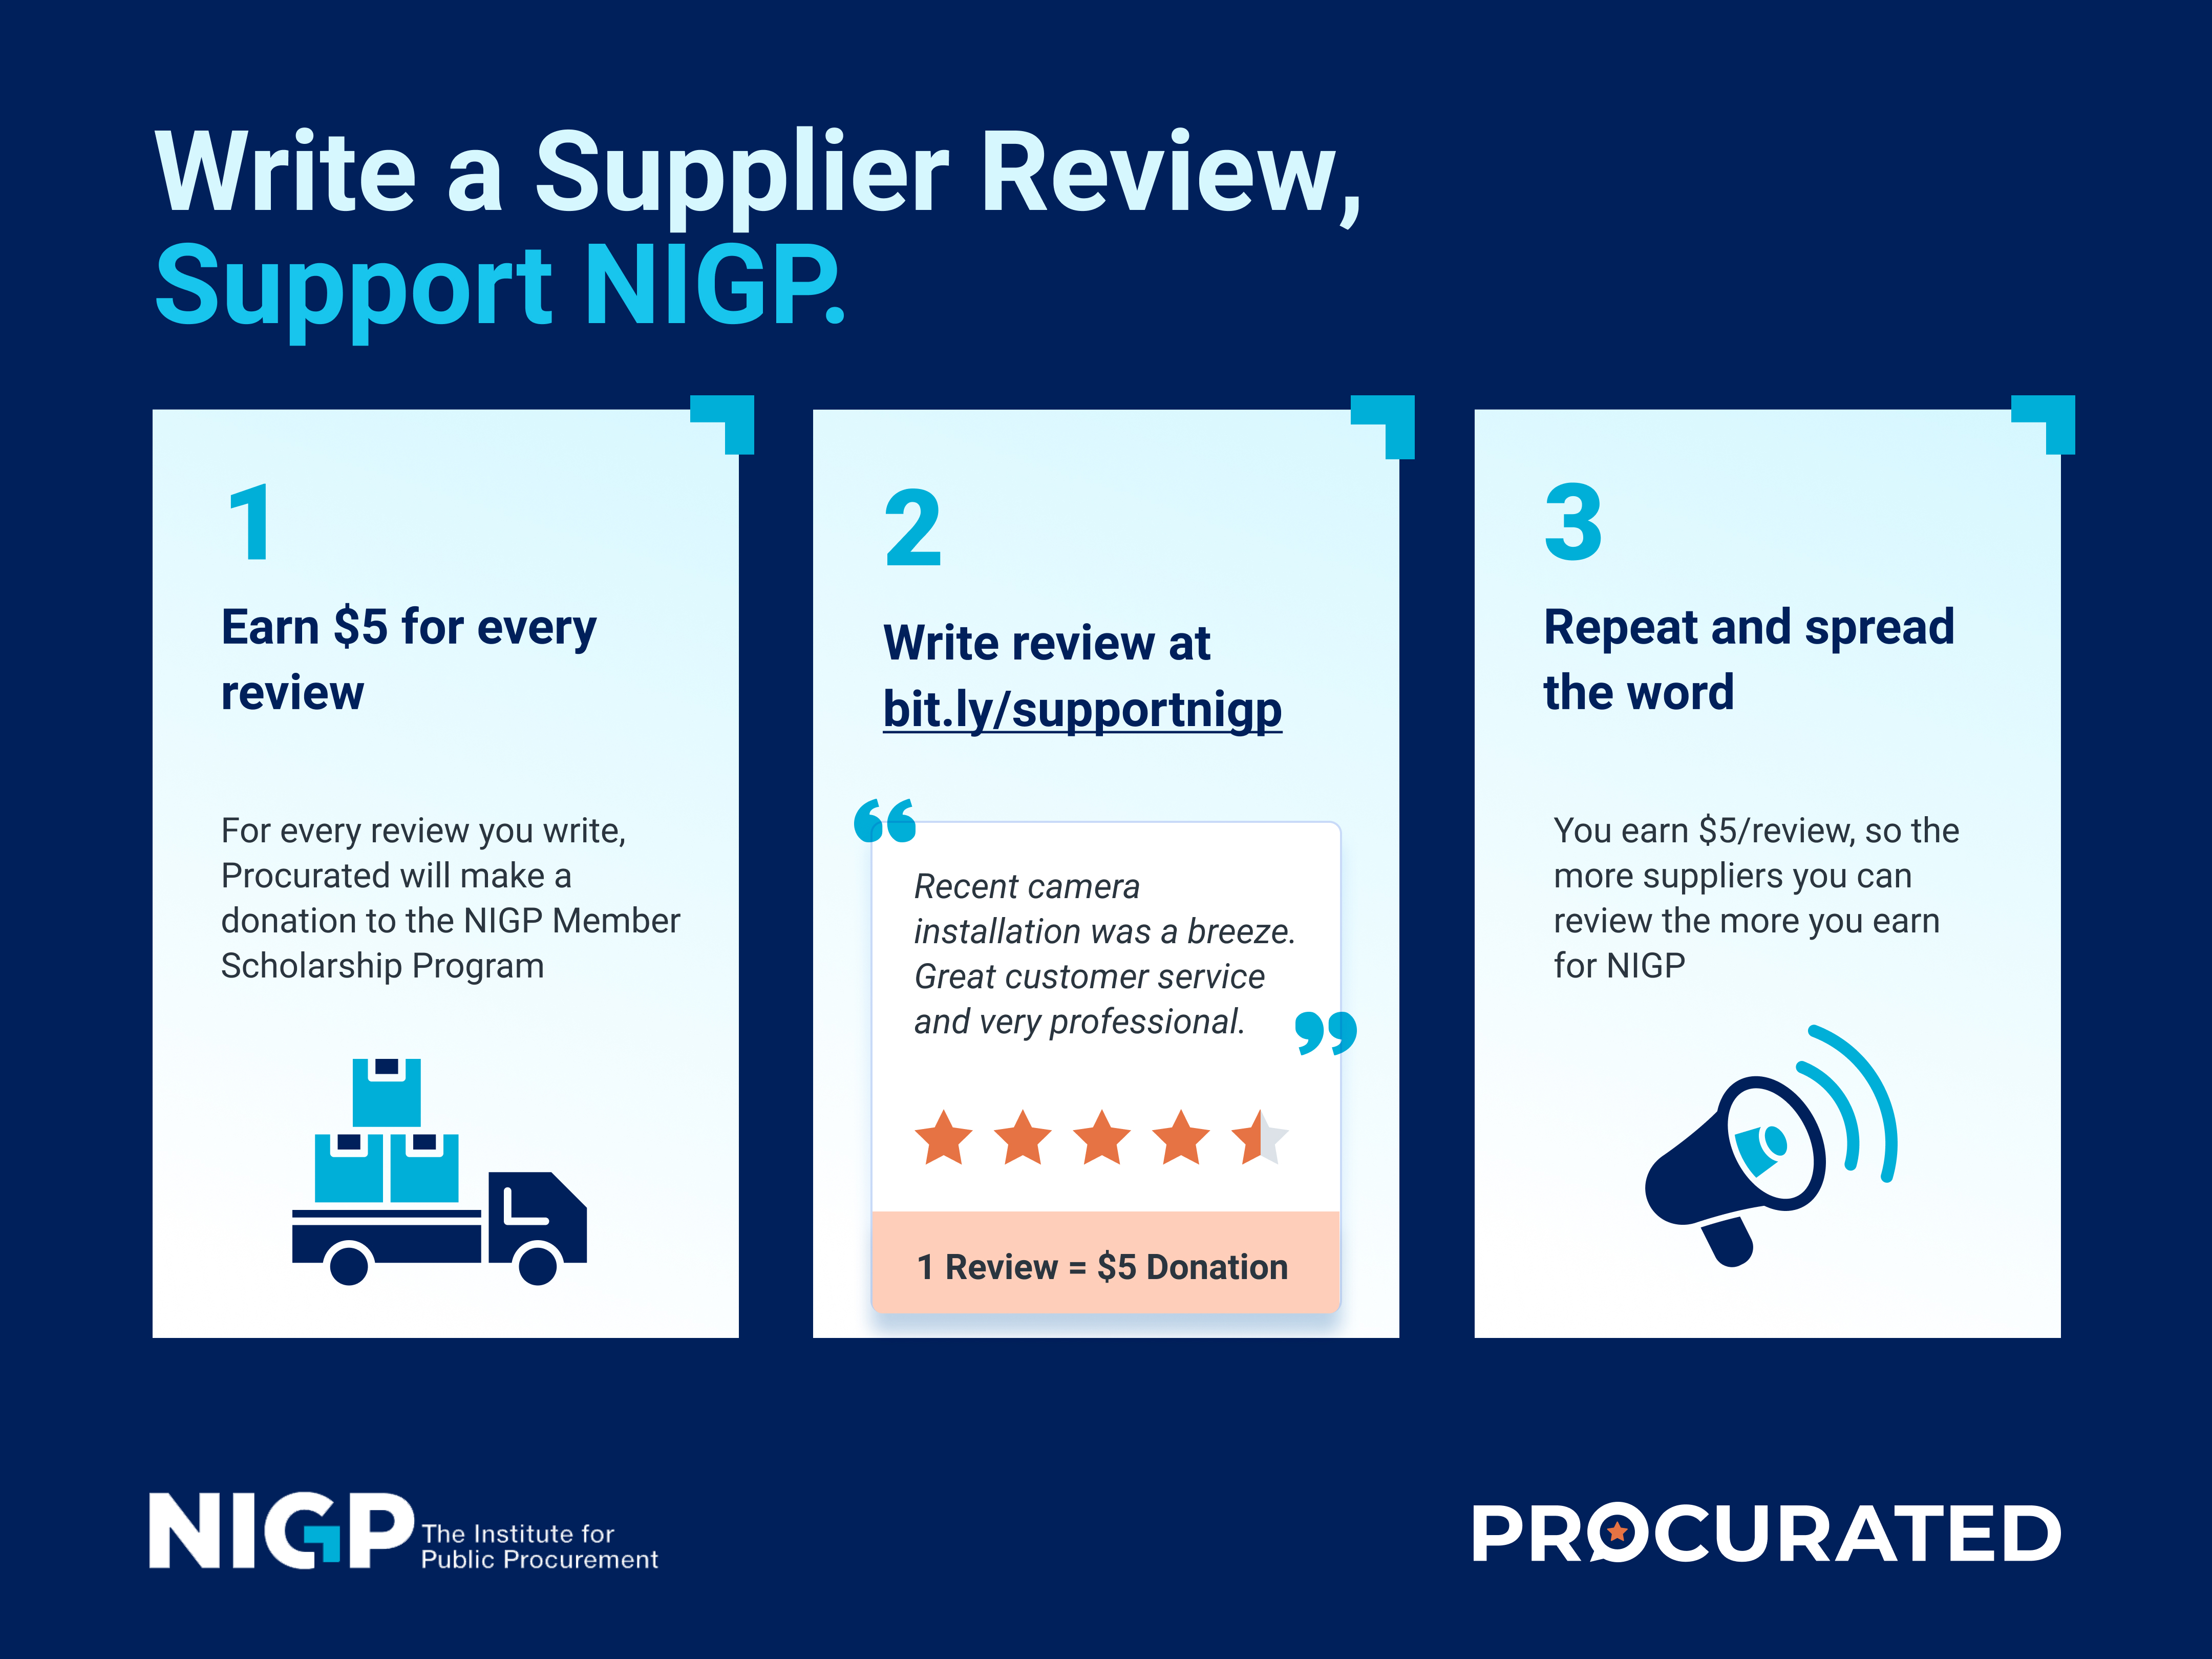 Write a Supplier Review, Support NIGP